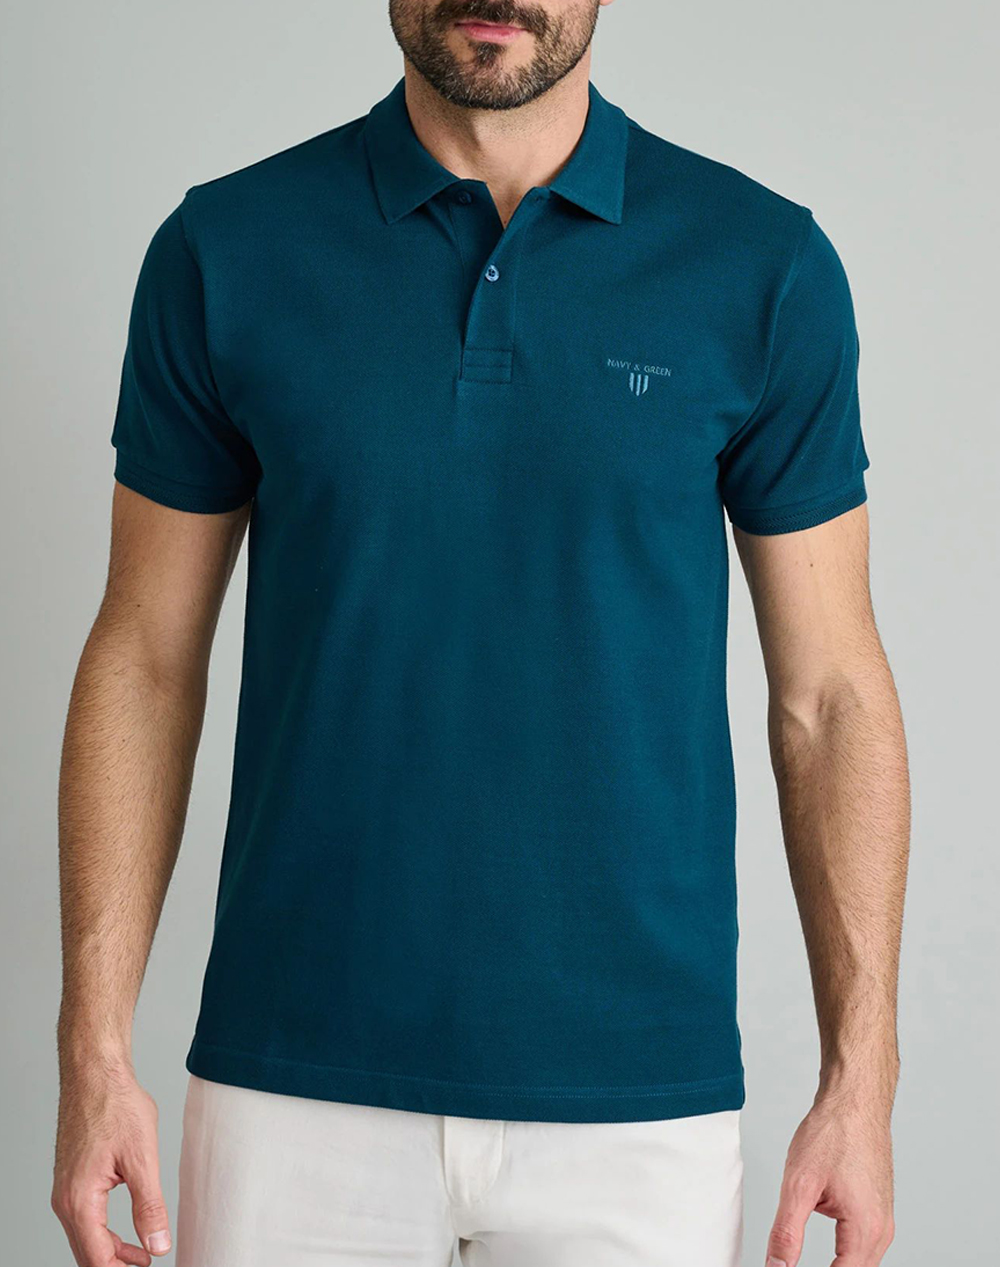 NAVY&GREEN POLO ΜΠΛΟΥΖΑΚΙ-YOUNG LINE 24EY.007/PL/YL-MOROCCAN BLUE Petrol 3820PNAVY3410092_XR21036